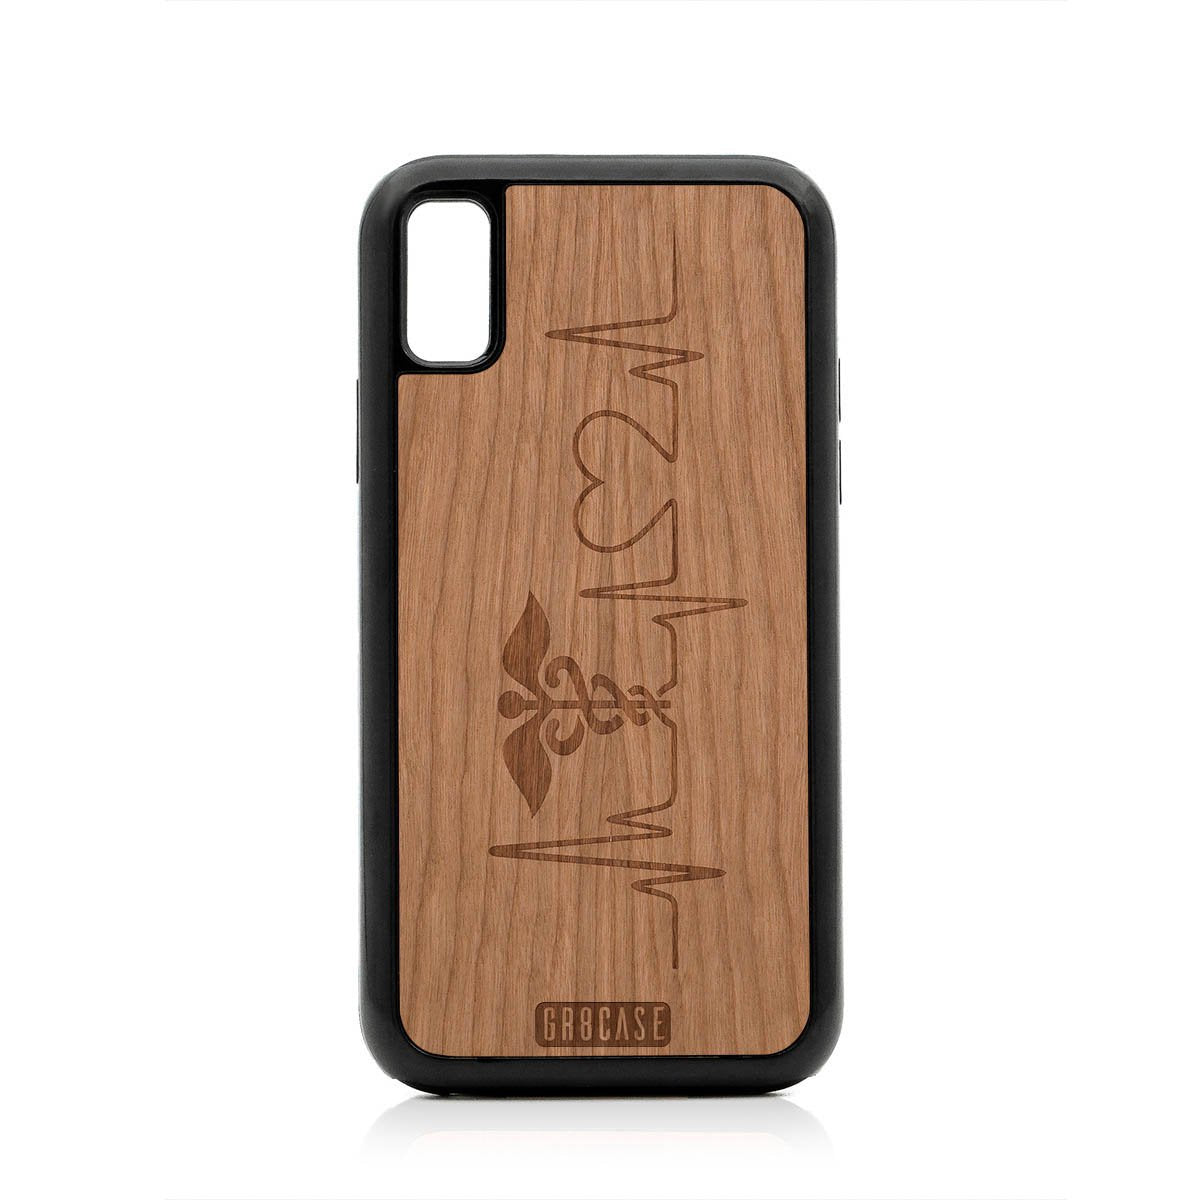 Hero's Heart (Nurse, Doctor) Design Wood Case For iPhone X/XS by GR8CASE